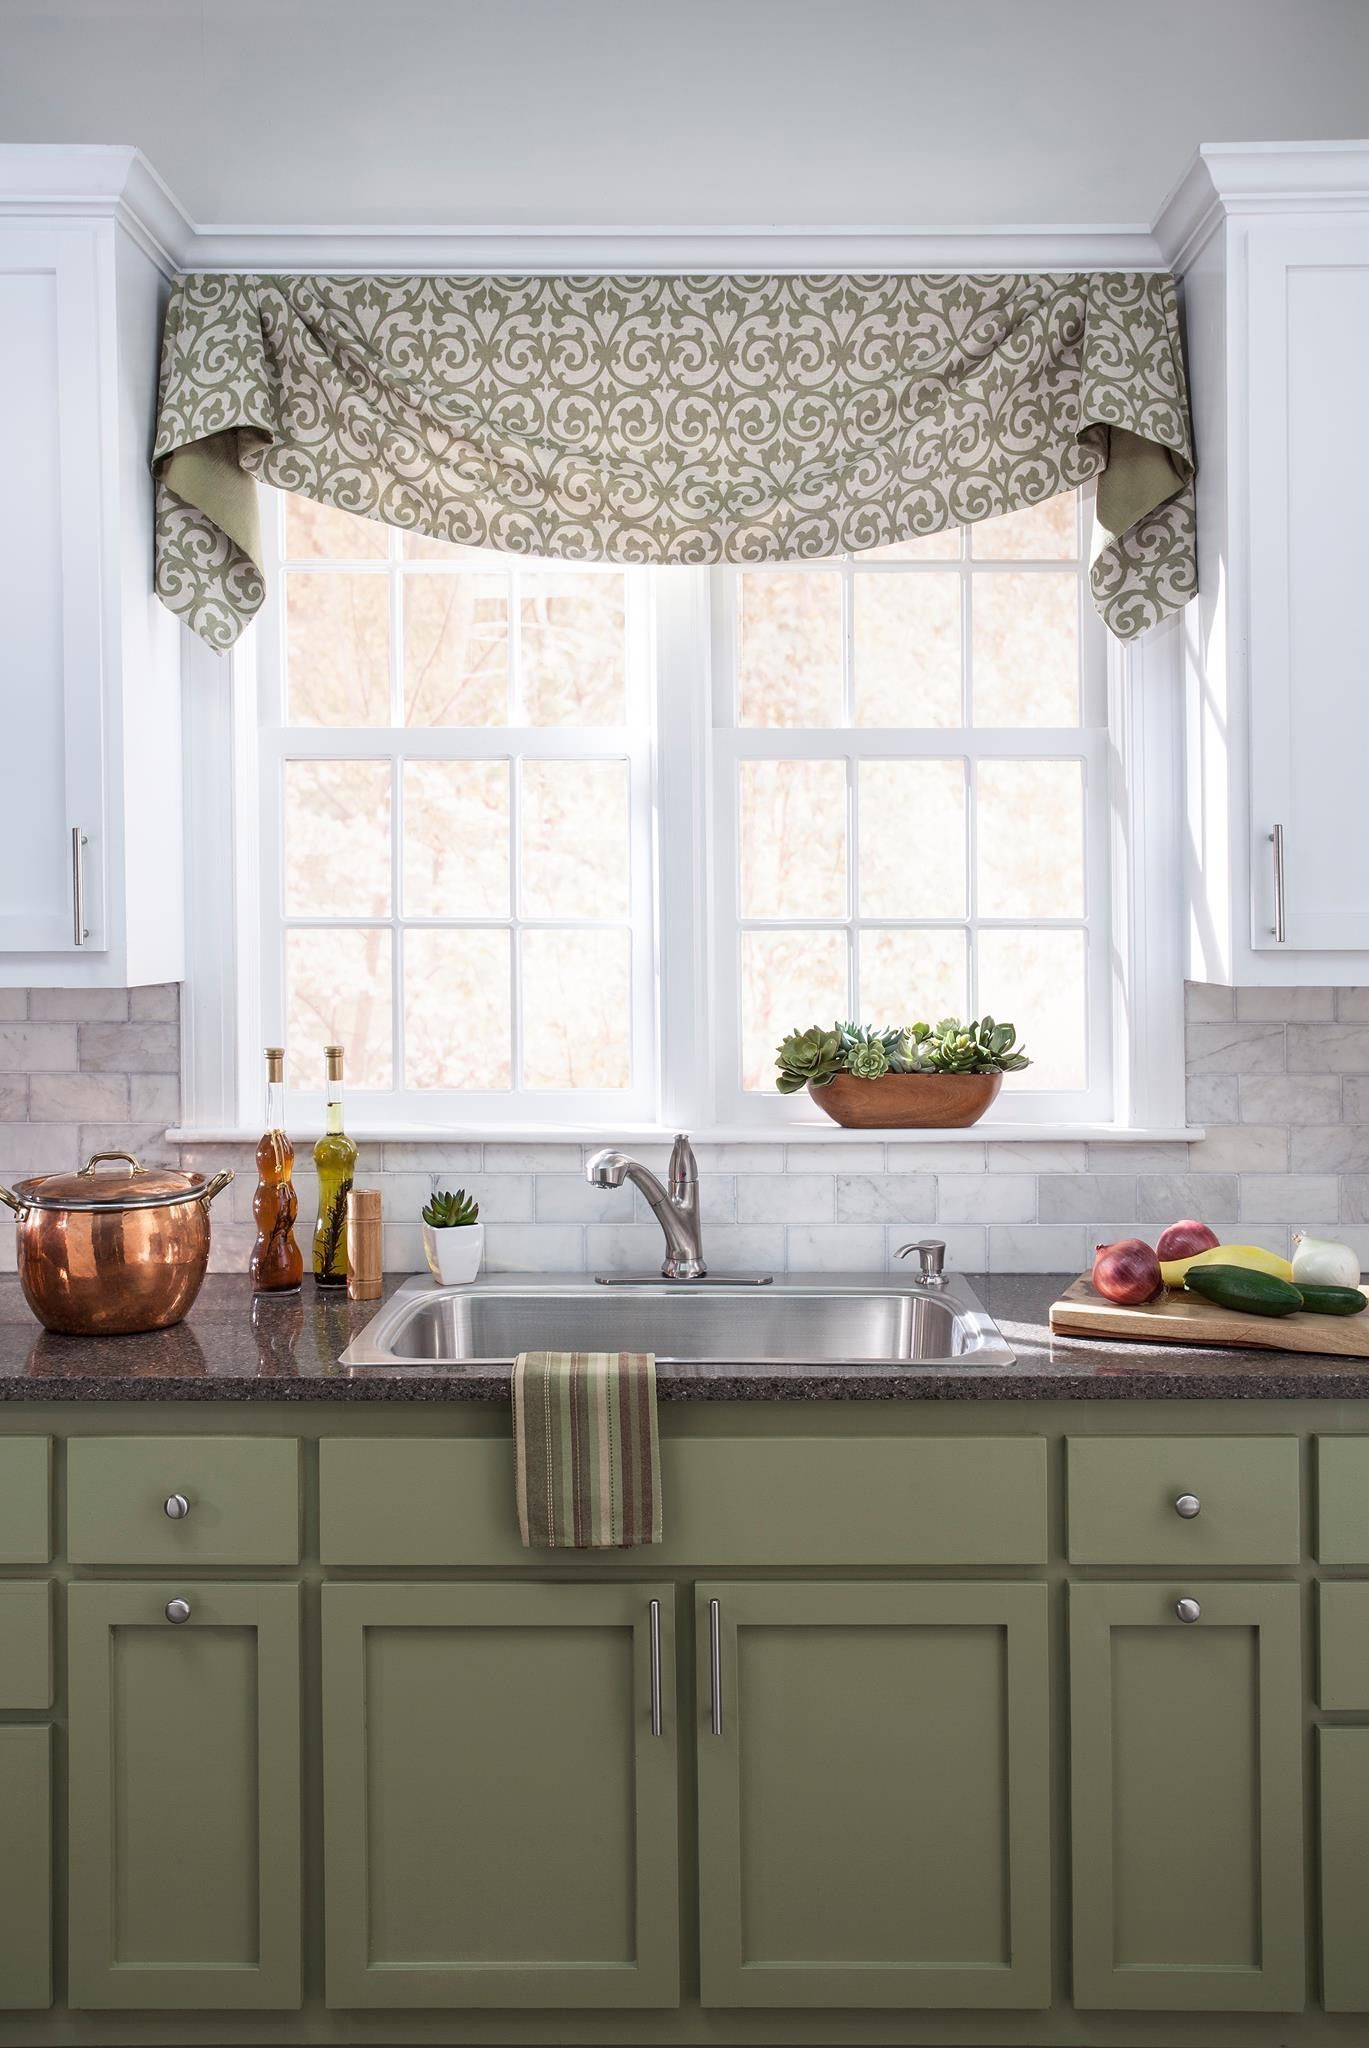 Valance Curtains For Kitchen
 Pin by Christine Egan on windows